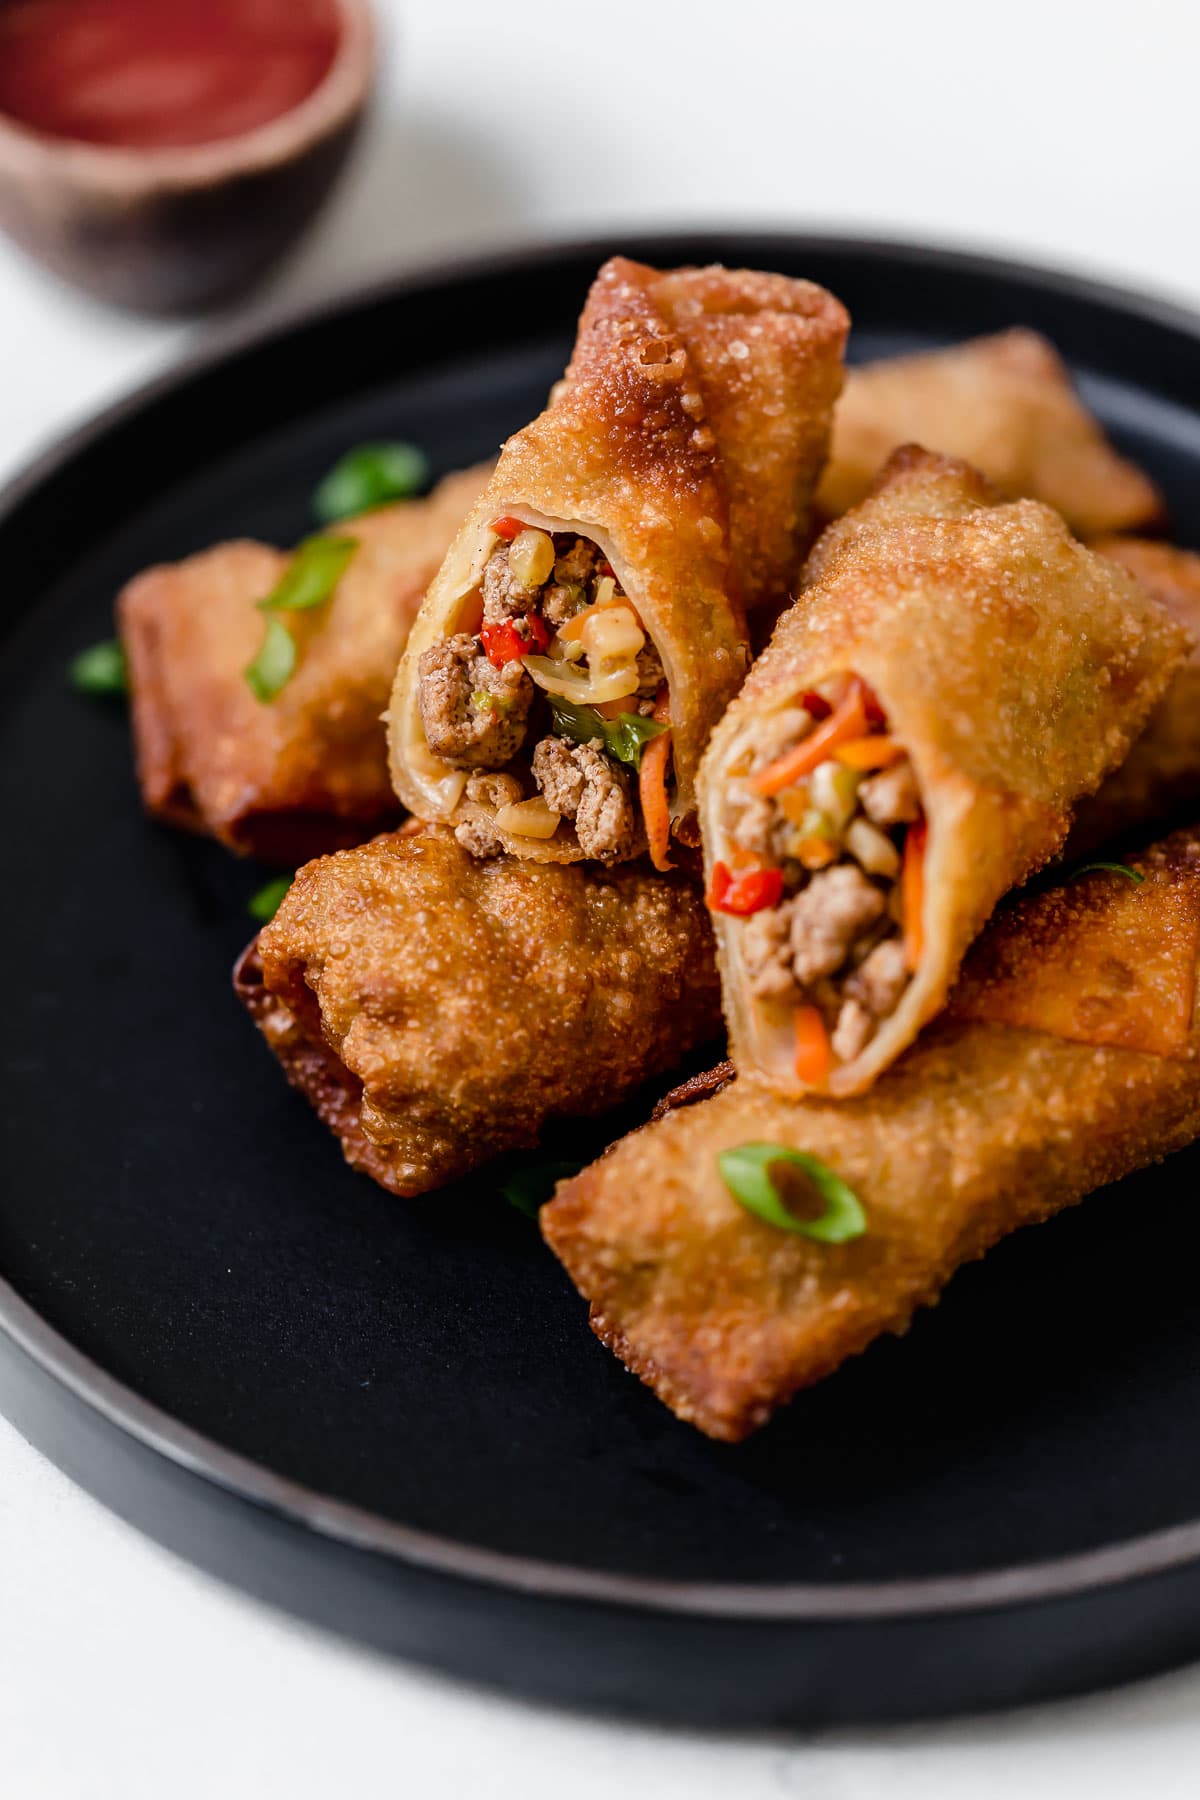 Egg Rolls Fried Or Baked Cooking Classy,Crate Training A Puppy Overnight